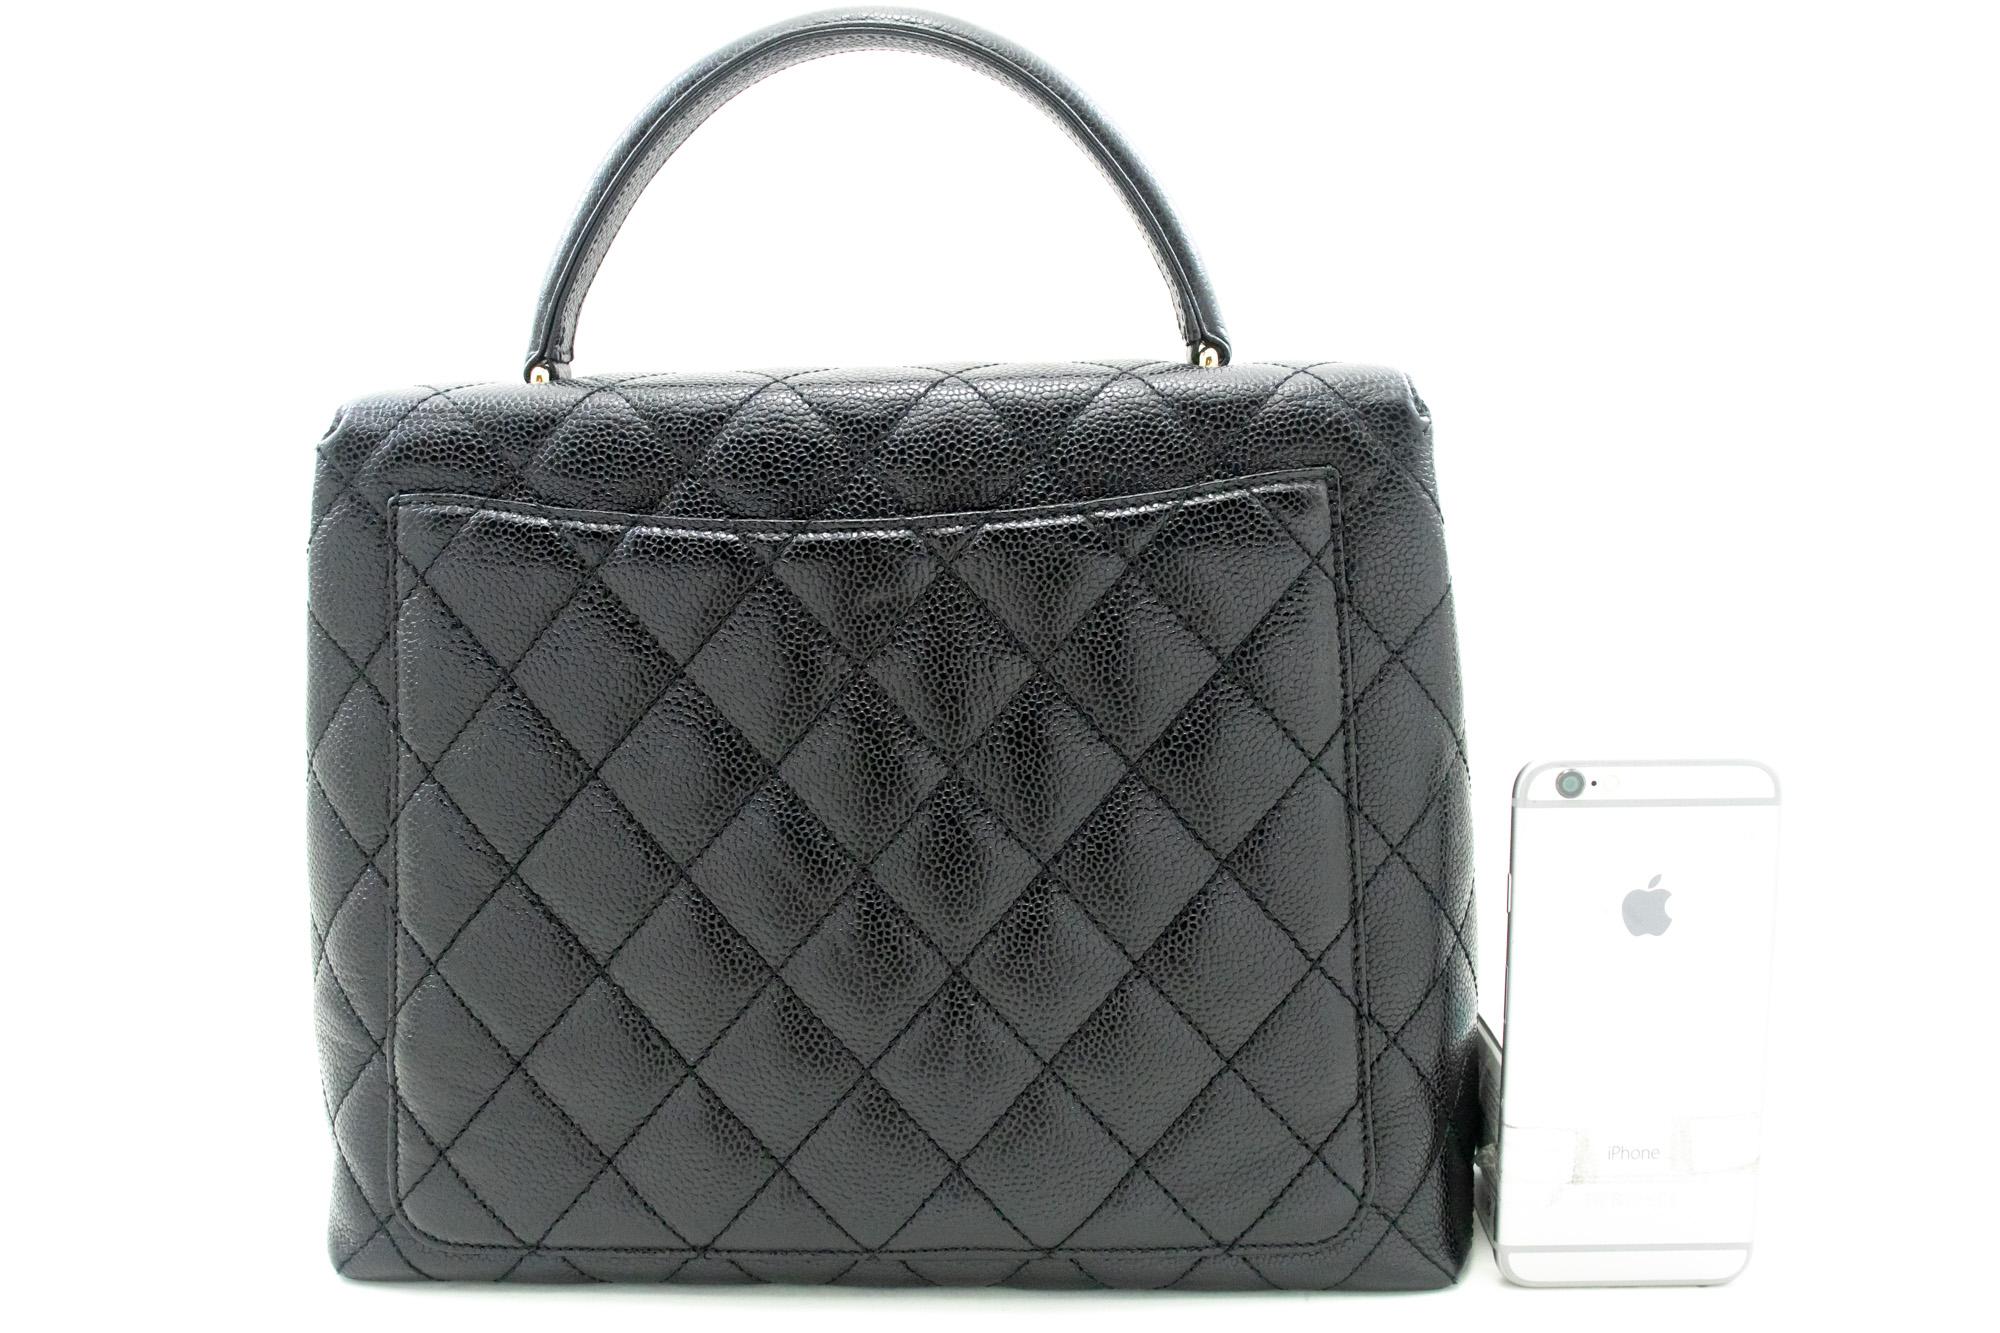 CHANEL Caviar Handbag Top Handle Bag Kelly Black Flap Leather Gold In Good Condition For Sale In Takamatsu-shi, JP